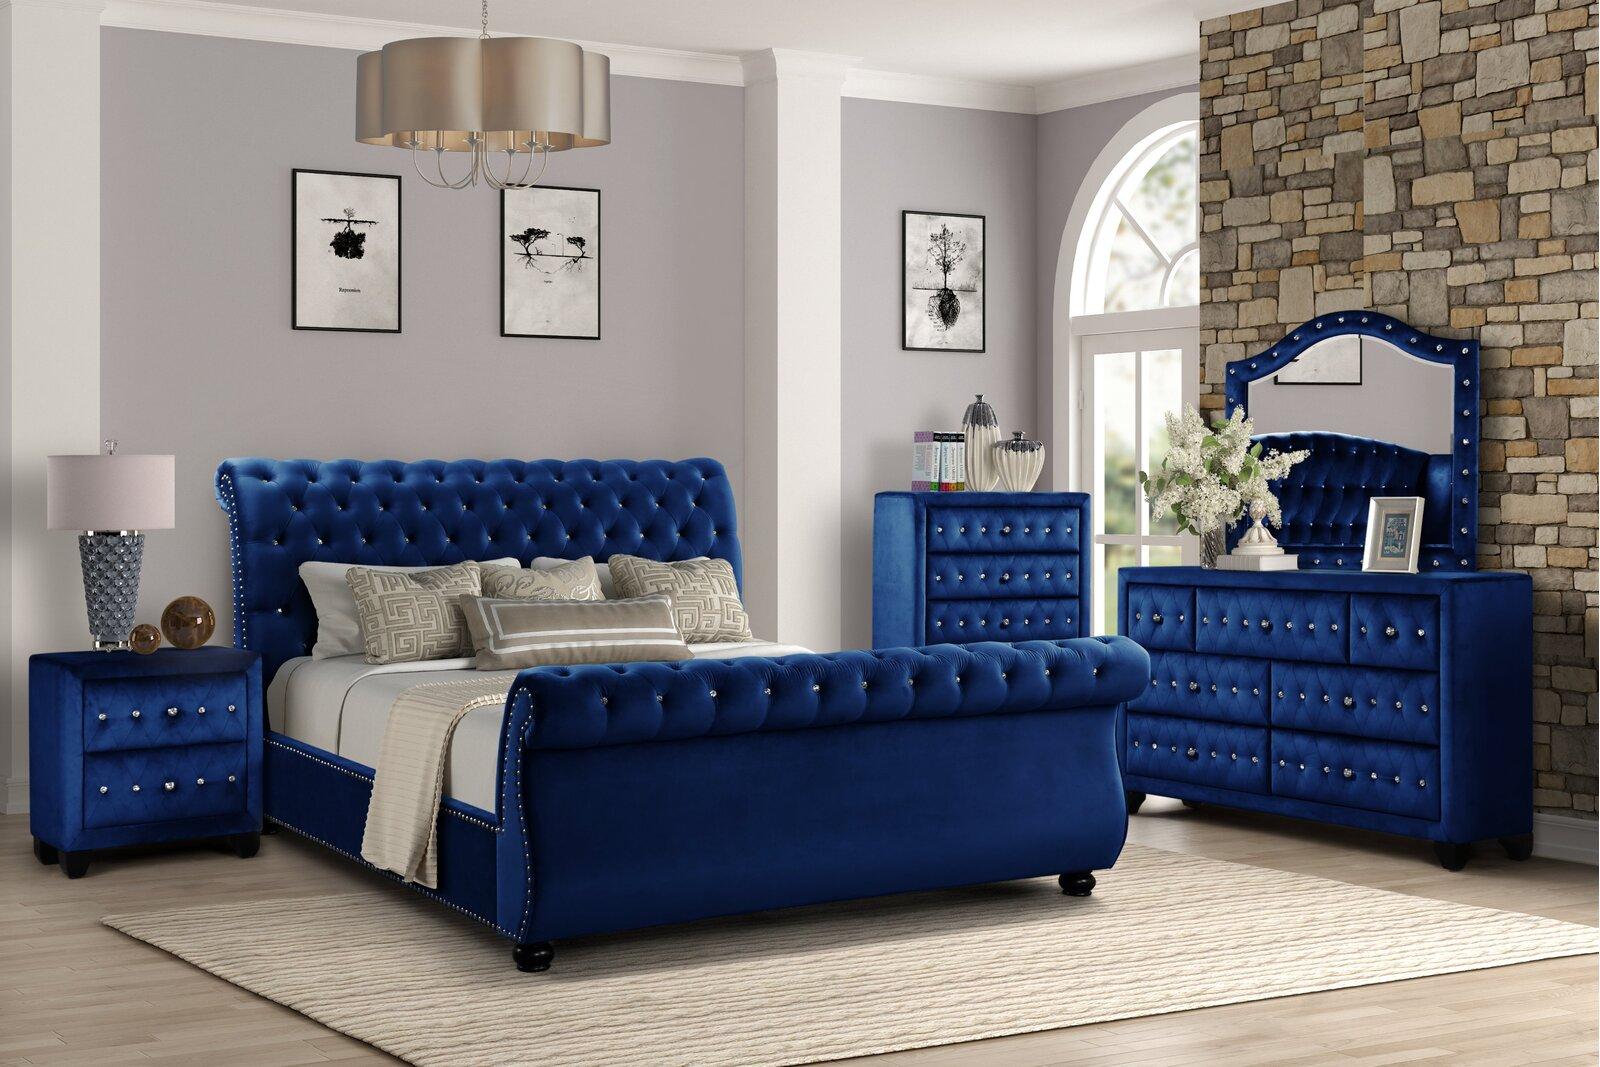 Contemporary, Modern Sleight Bedroom Set KENDALL GHF-808857957696-Set-4 in Navy 